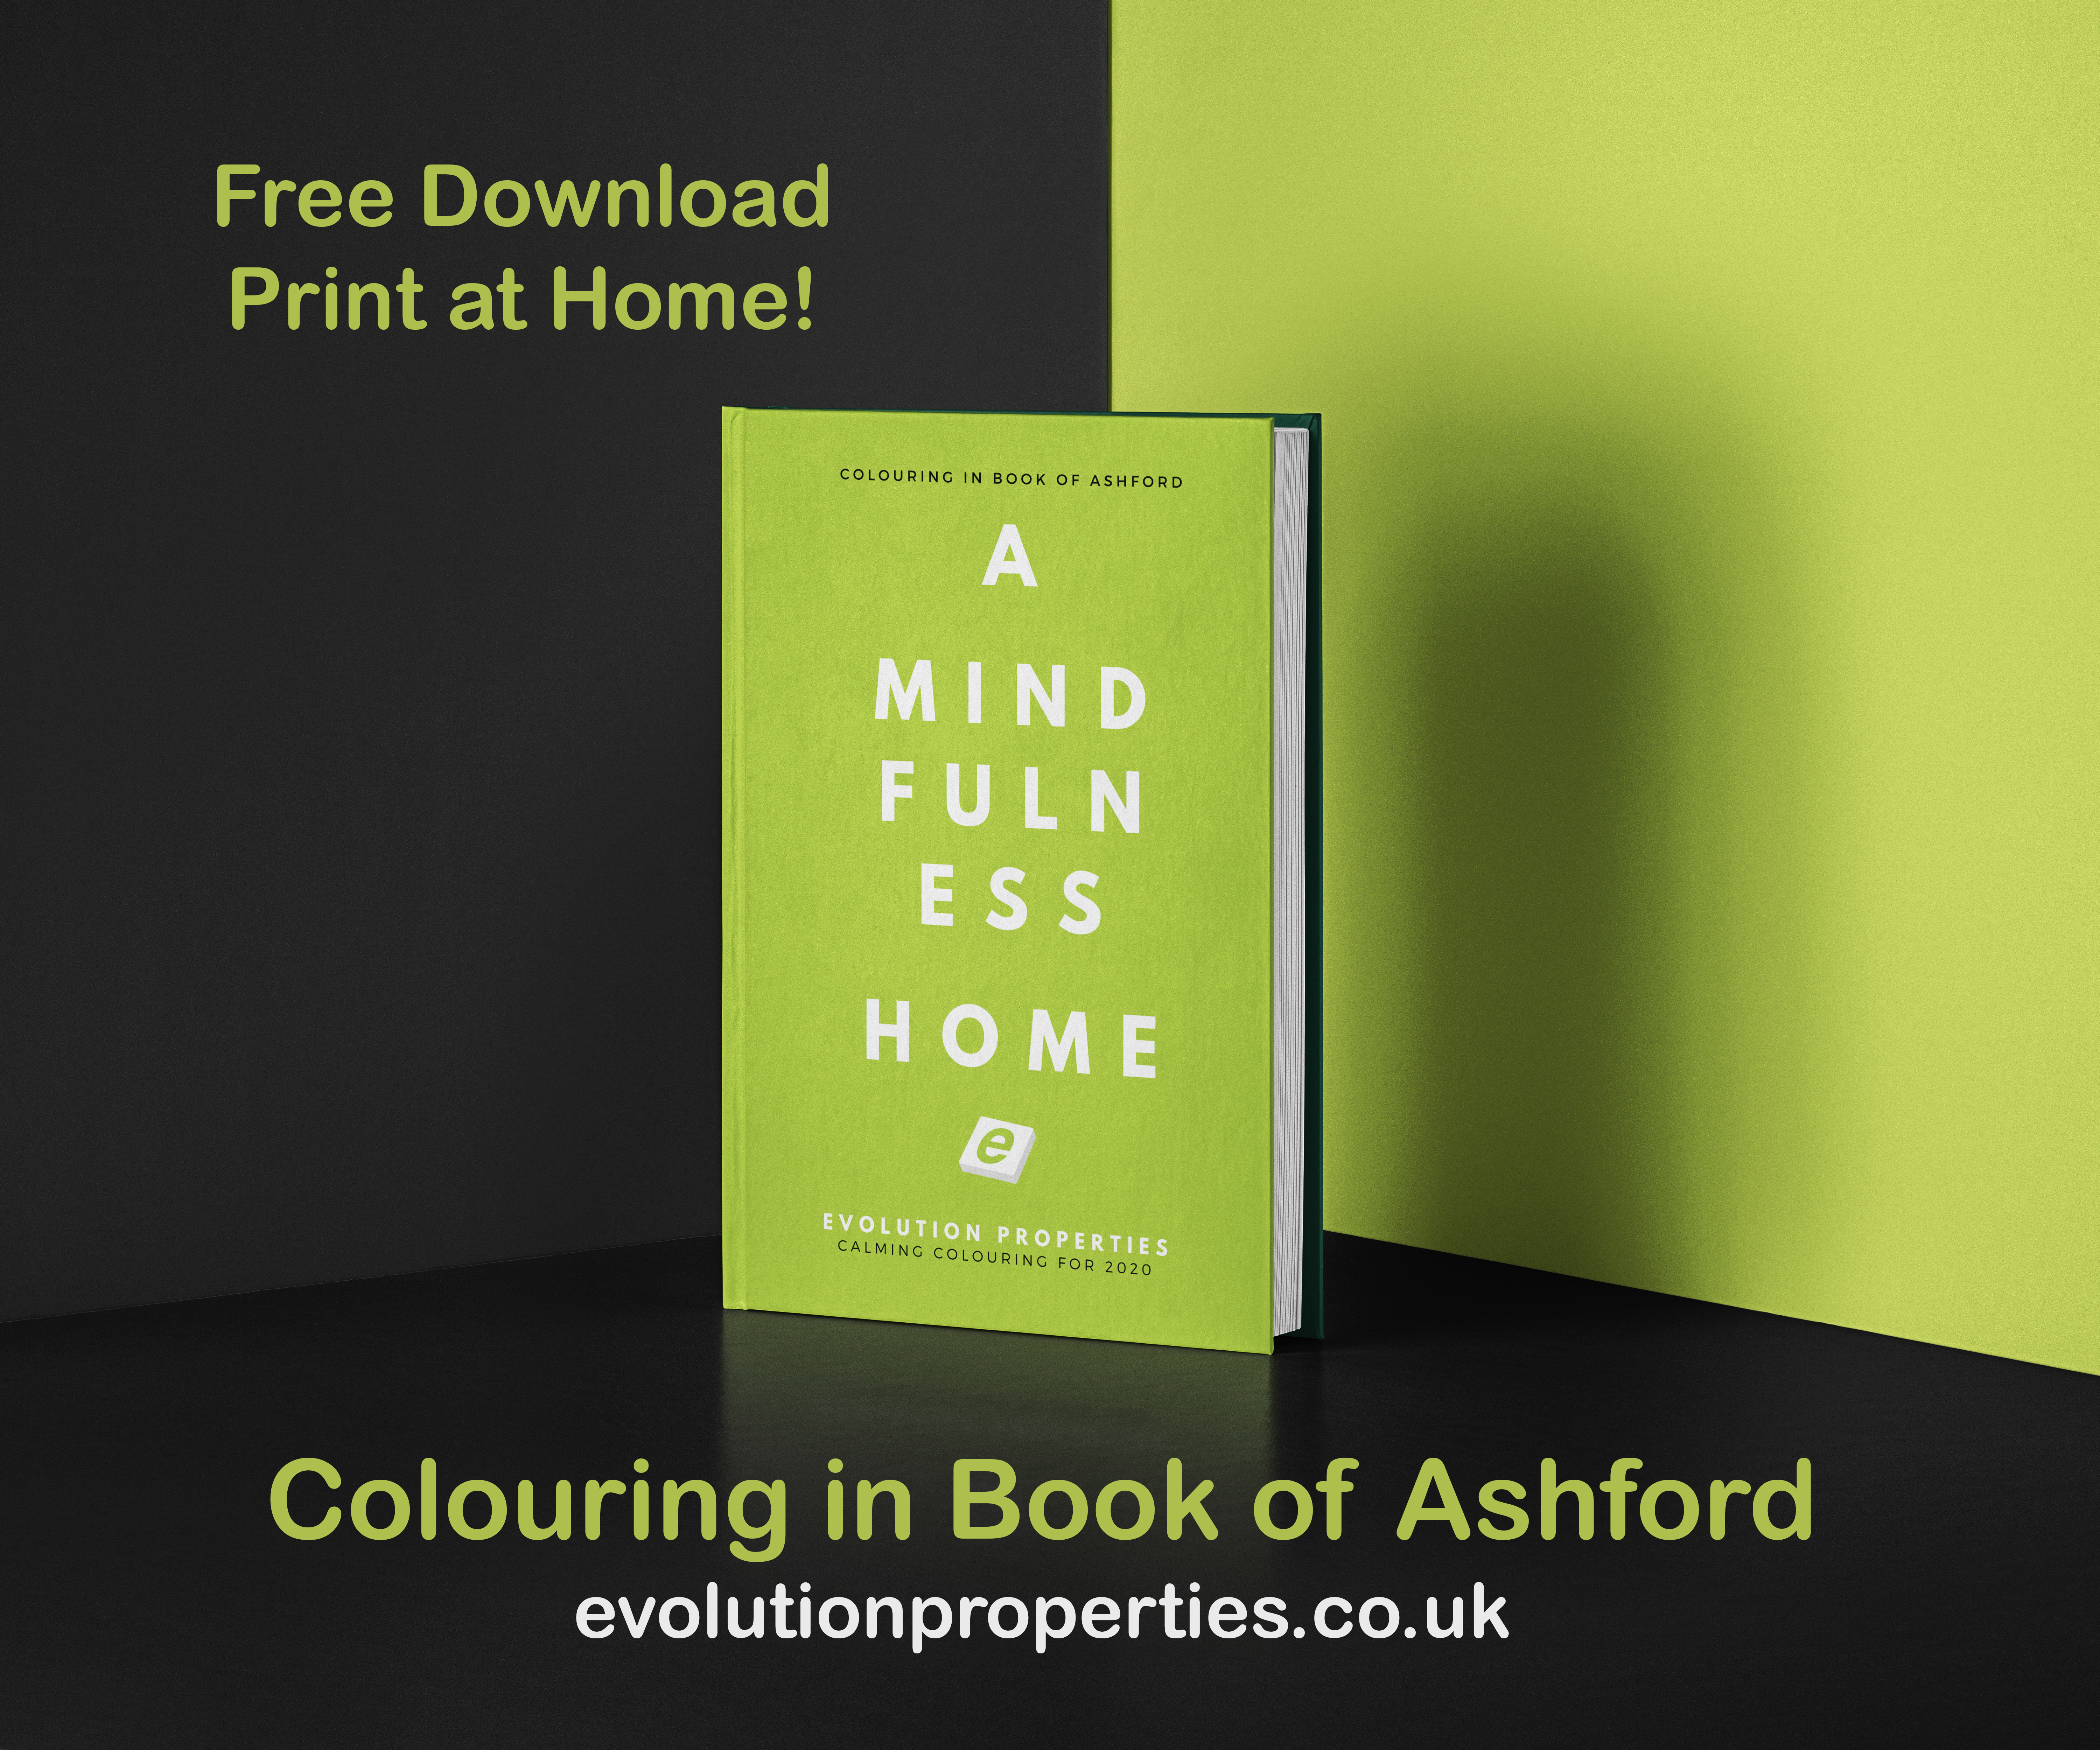 BEAT THE BOREDOM WITH OUR FREE E-BOOK!